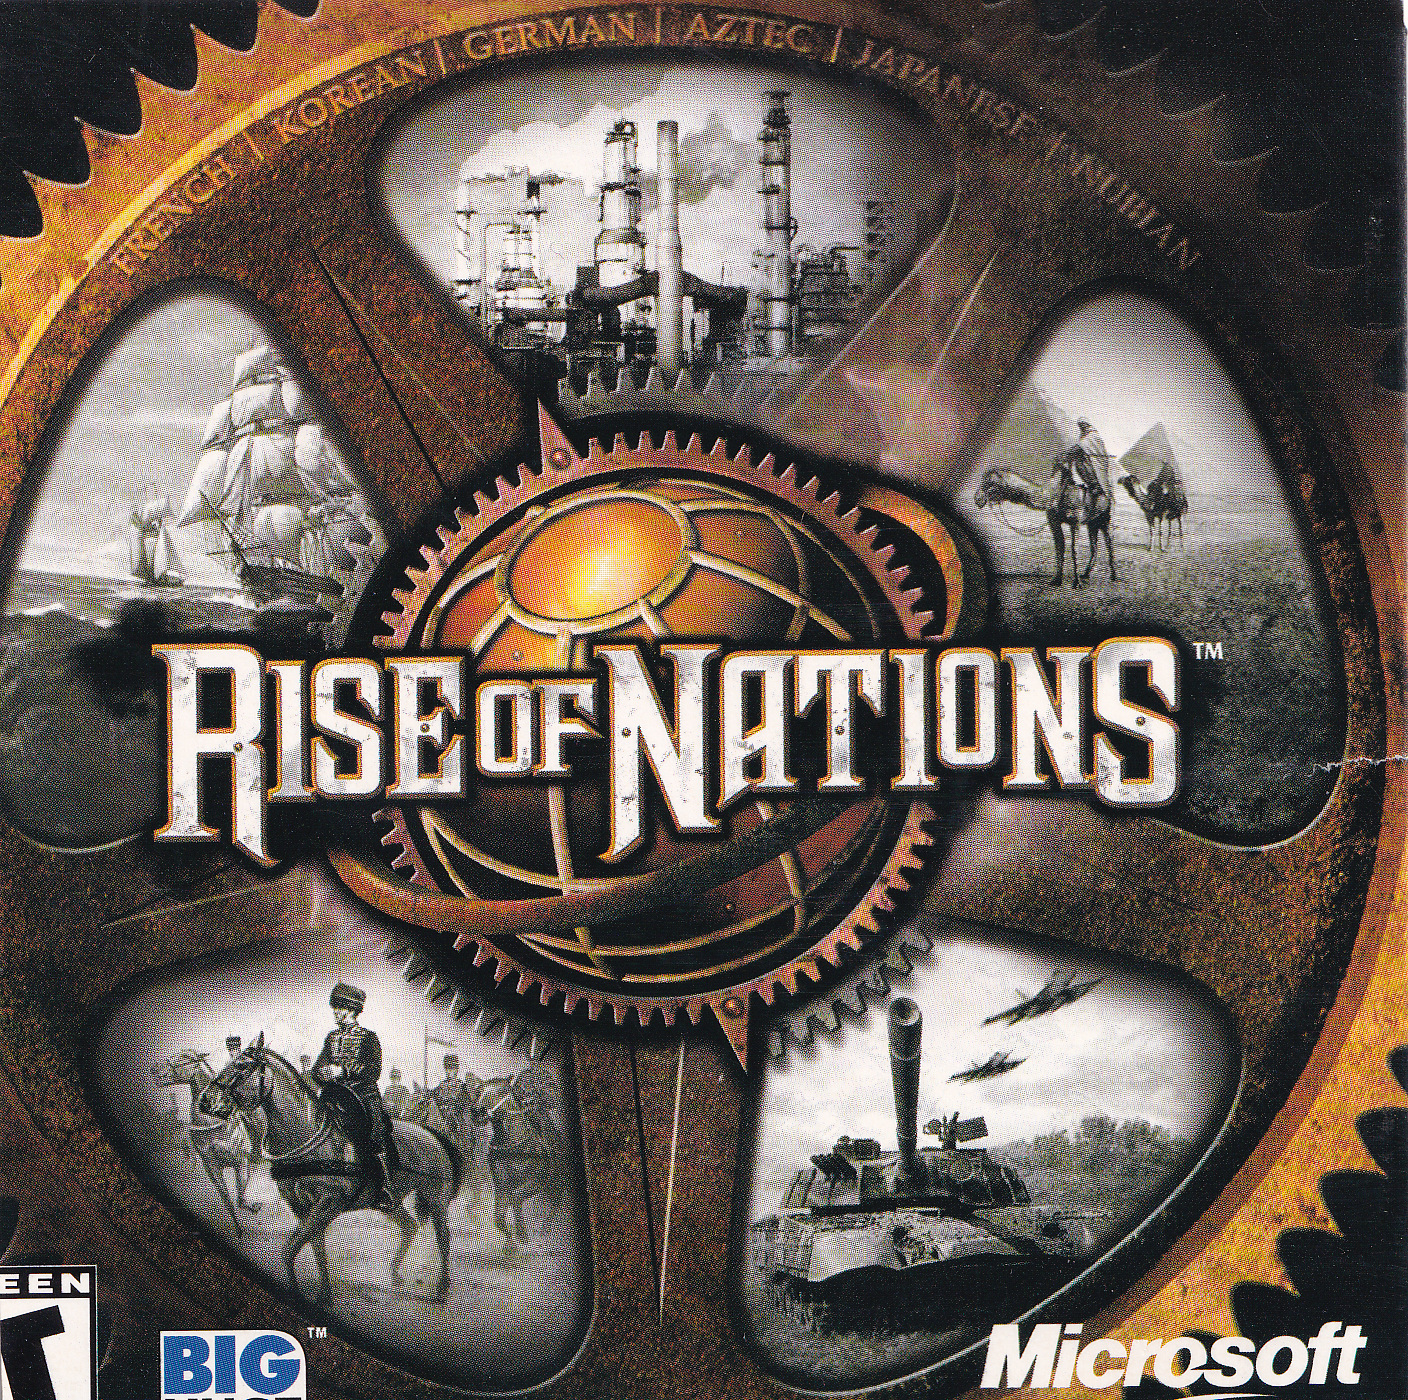 Rise of Nations Original Soundtrack (2003) MP3 - Download Rise of Nations  Original Soundtrack (2003) Soundtracks for FREE!